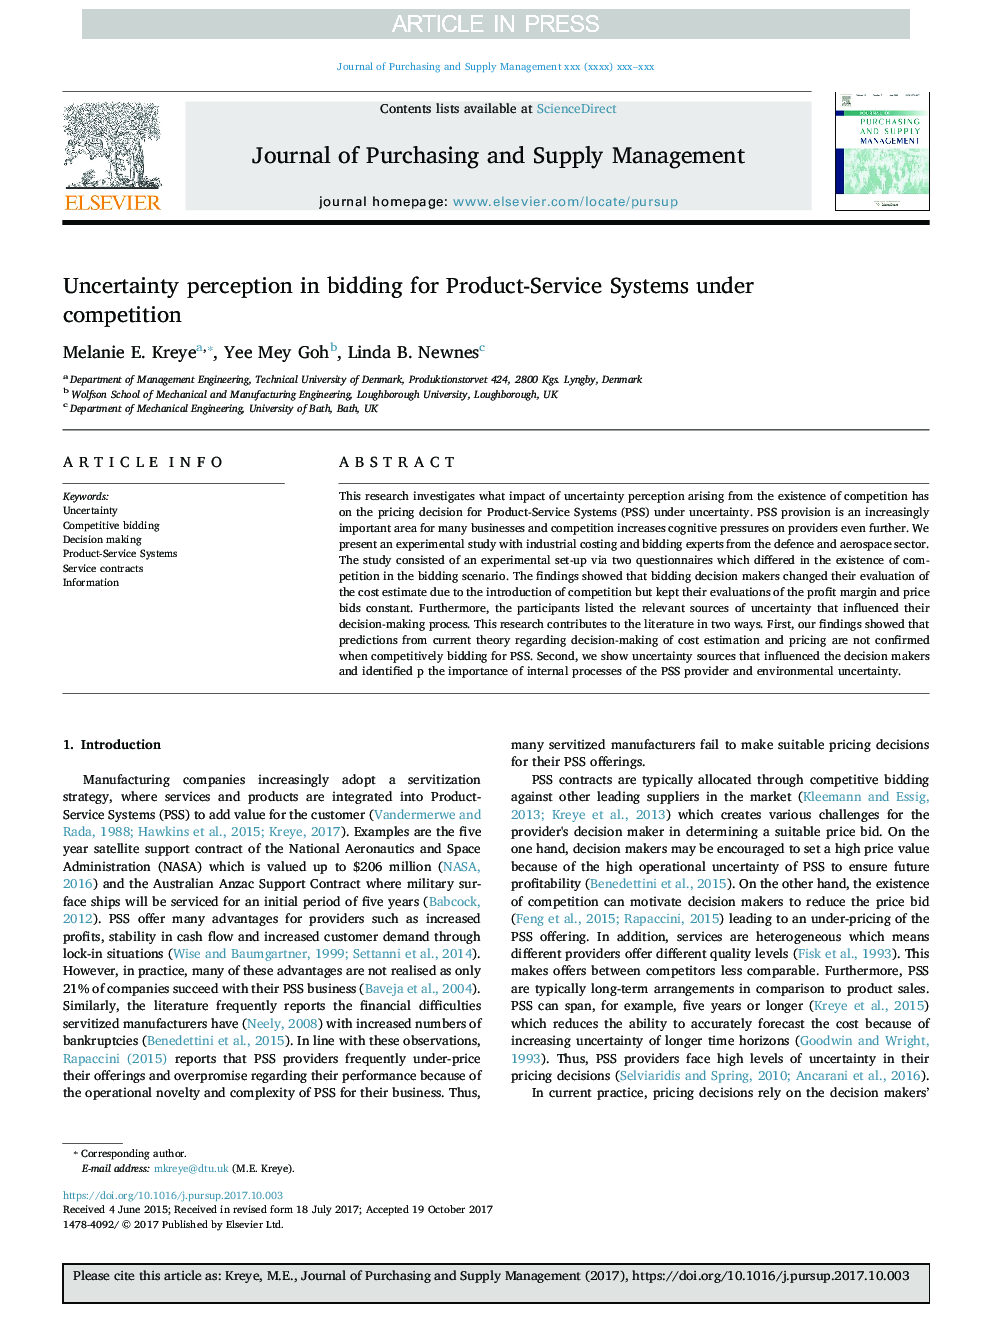 Uncertainty perception in bidding for Product-Service Systems under competition